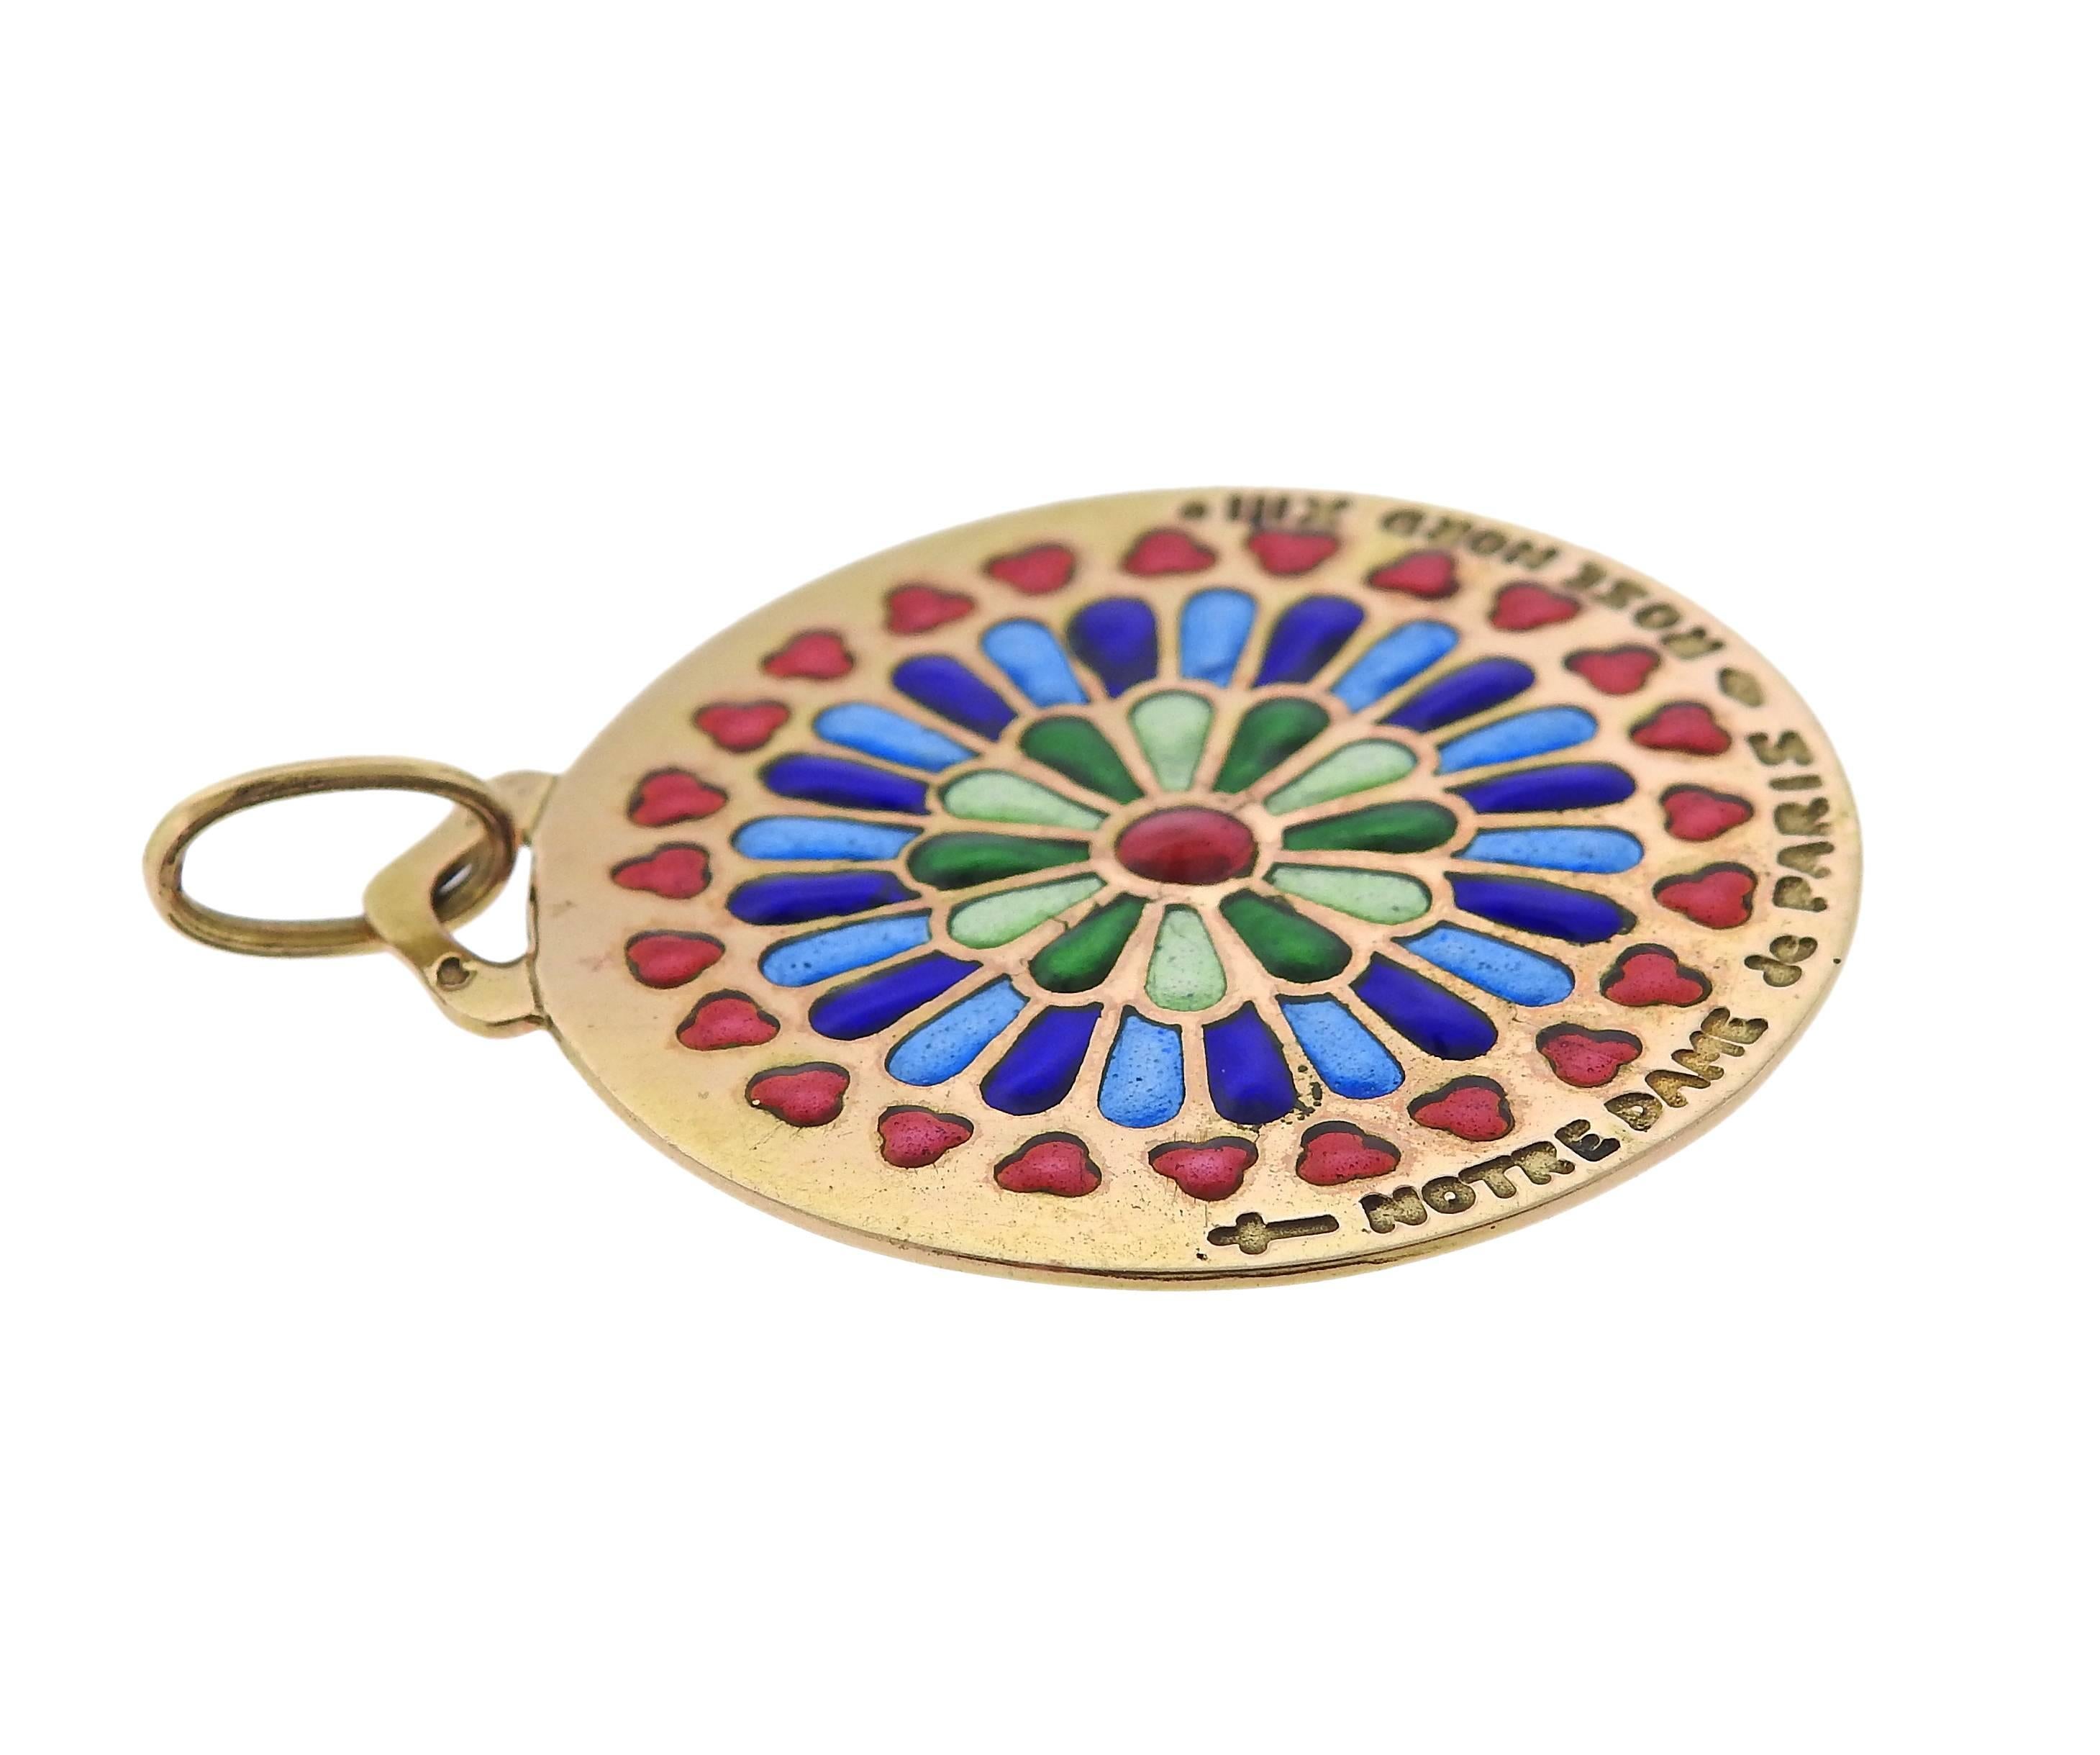 Antique 18k gold pendant, crafted in France, set with Plique a Jour enamel. Pendant is 35mm in diameter. Marked: Notre Dame de Paris Rose Nord XIII, French gold assay mark Weight of the piece - 7.6 grams.